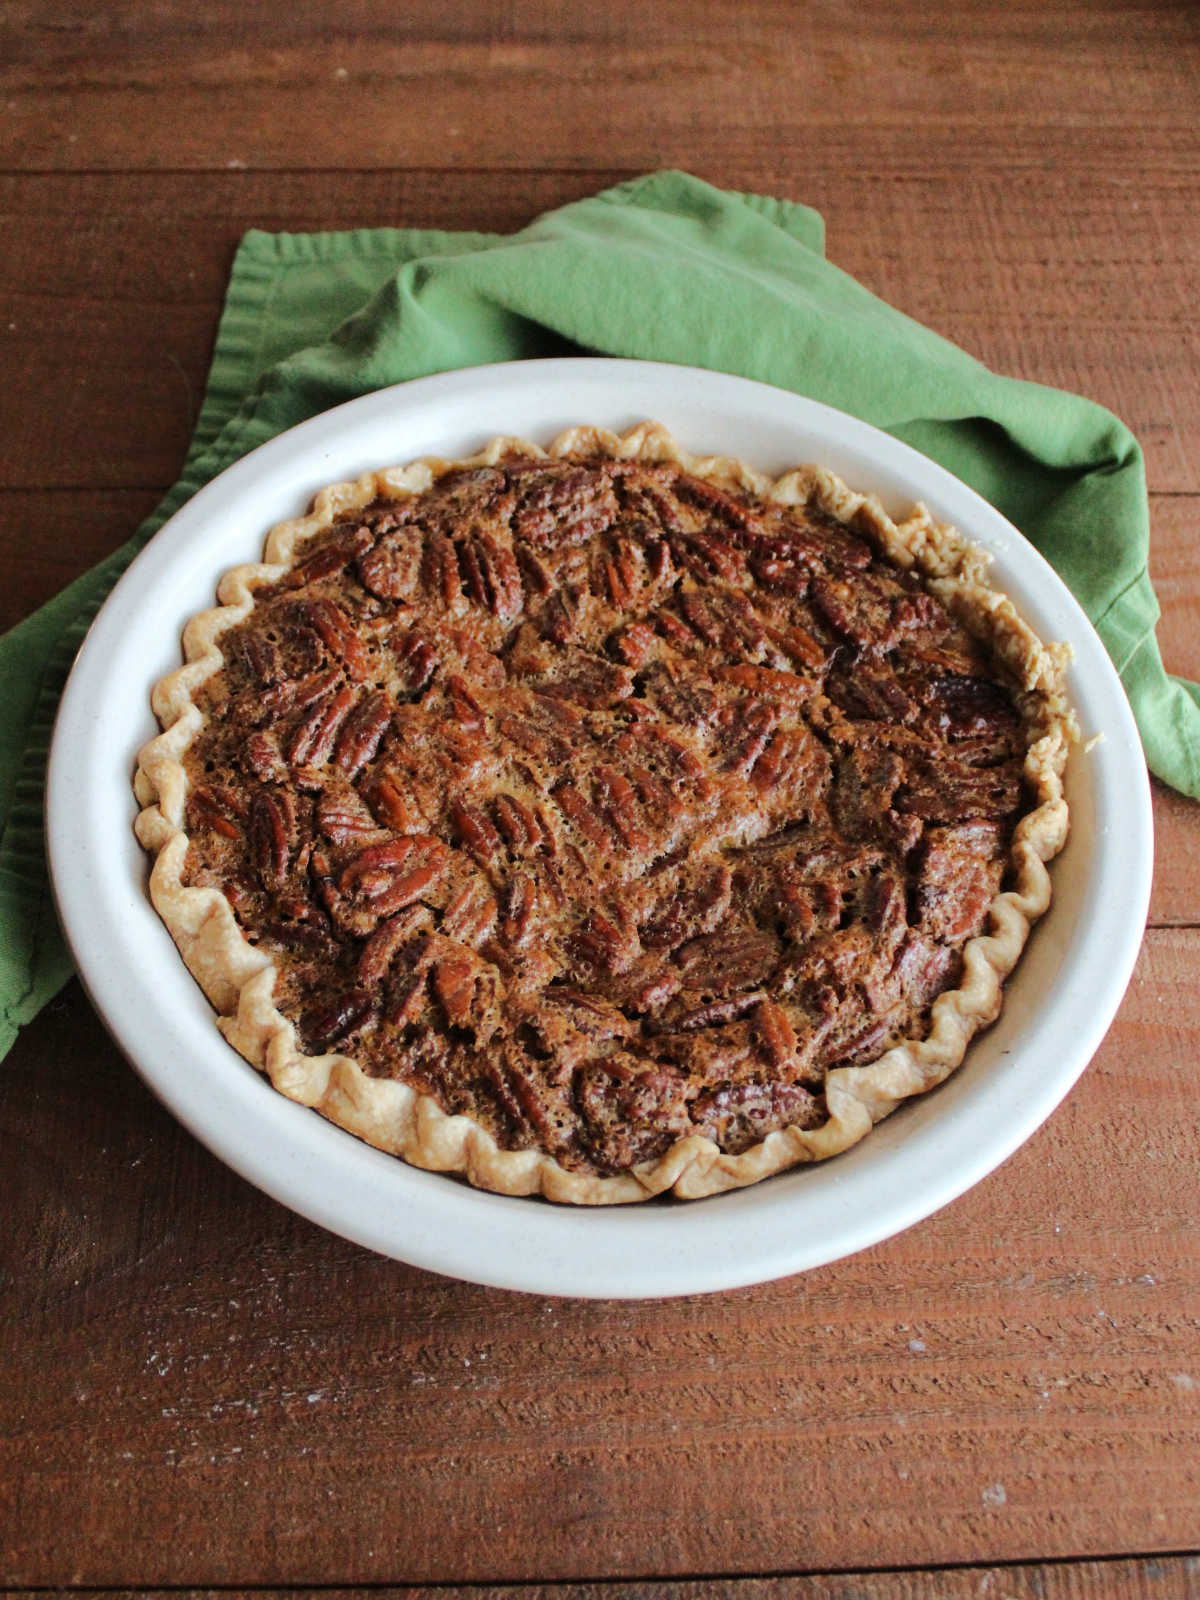 Freshly baked pecan pie with golden brown crusty top filled with lots of nuts.